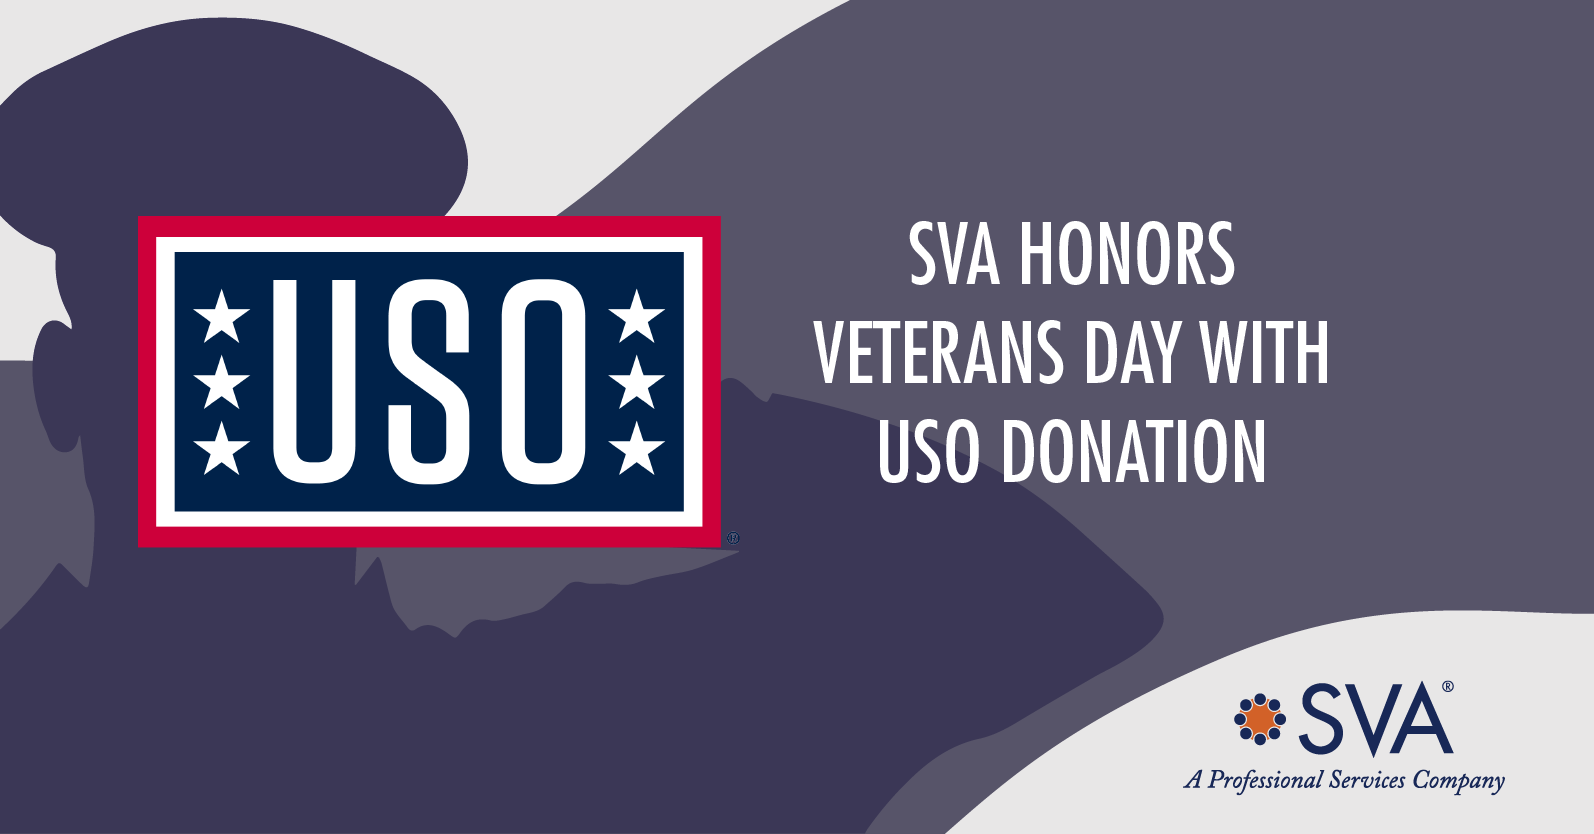 sva-honors-veterans-day-with-uso-donation